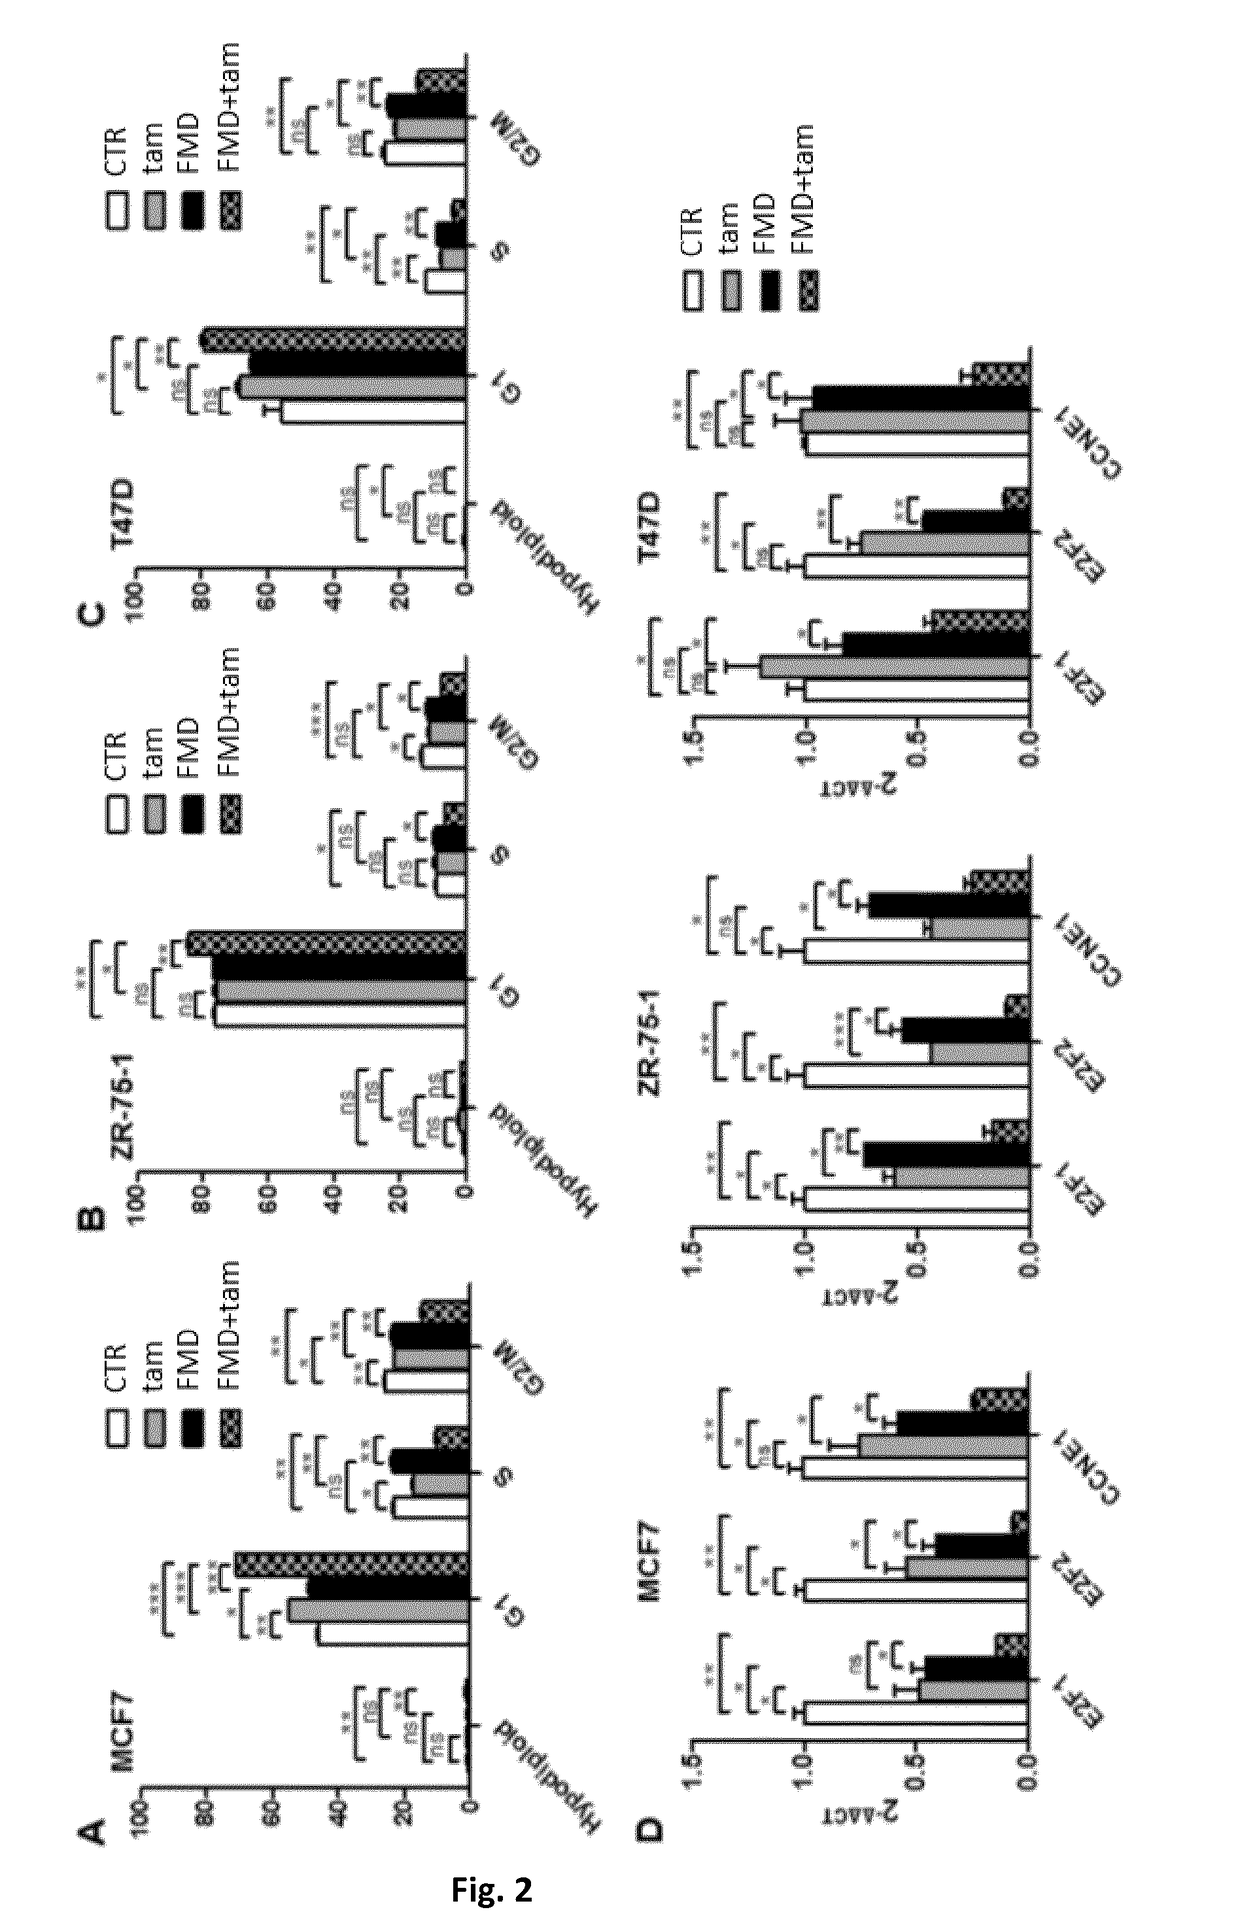 Use of a fasting mimicking diet to enhance the efficacy of antiestrogens in cancer